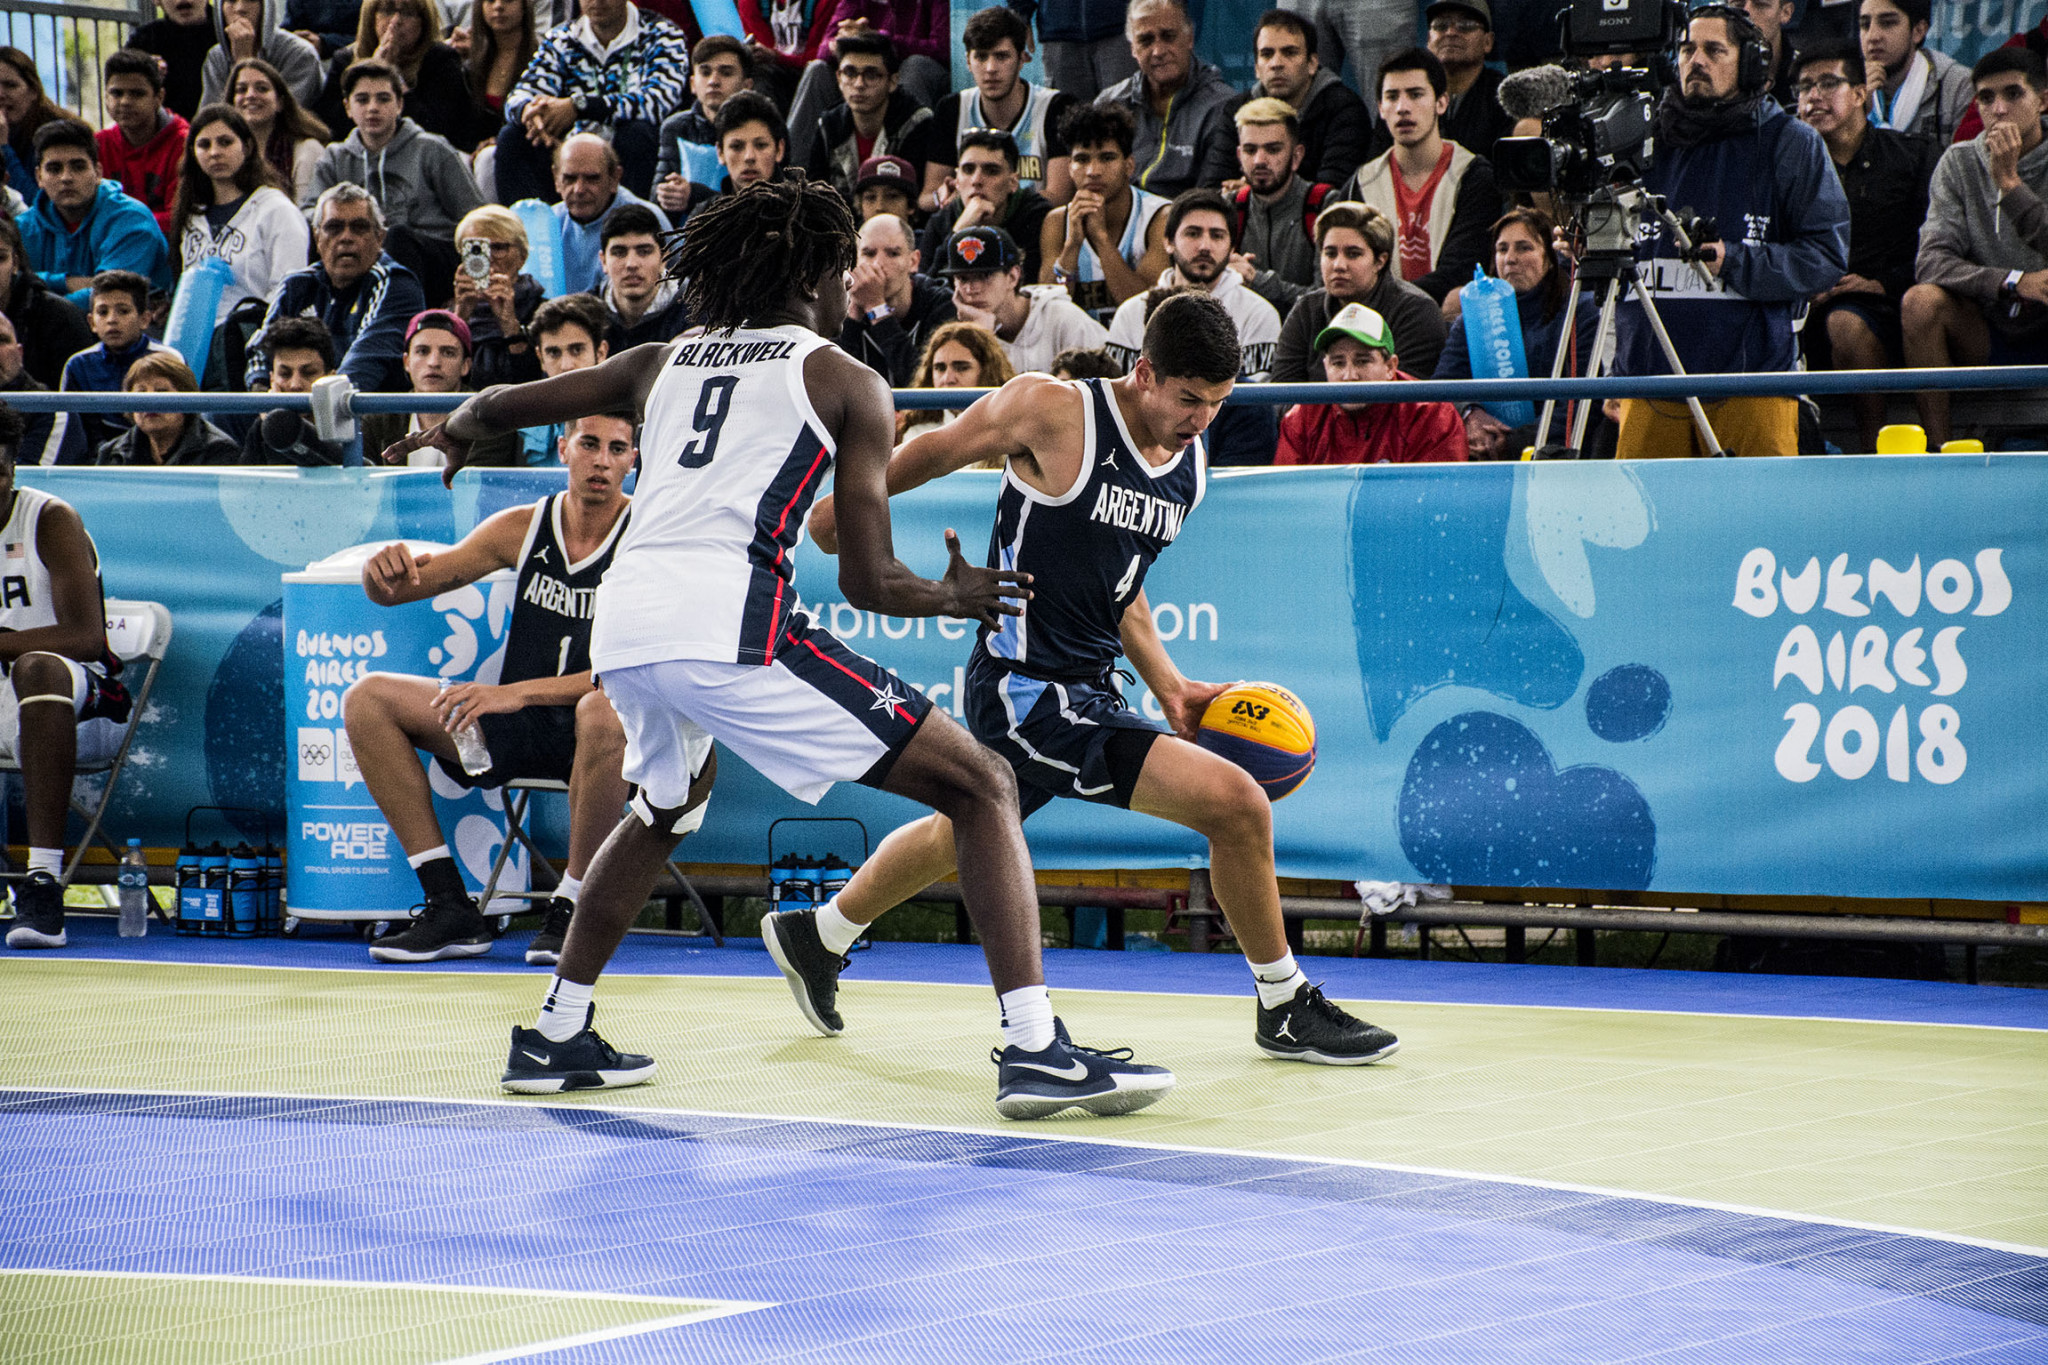 3x3 basketball action continued at the Urban Park ©Buenos Aires 2018 